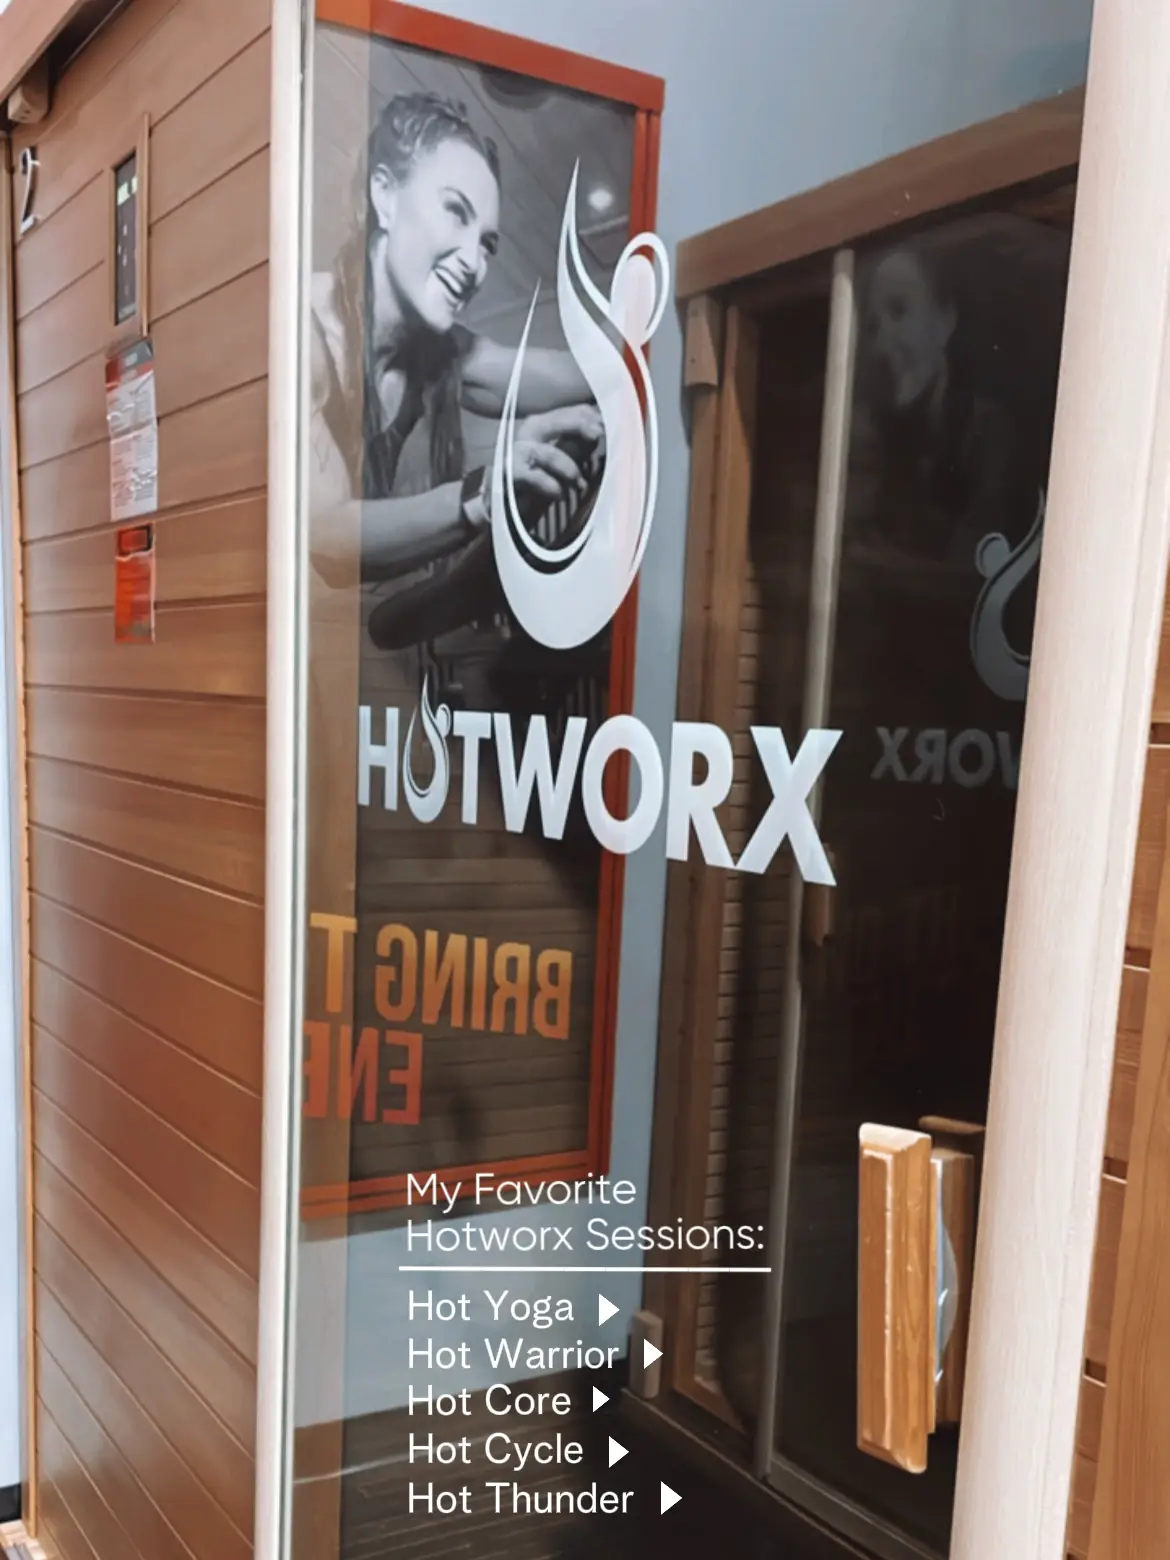 A little workout between @hotworx sessions! #hotworx #fyp